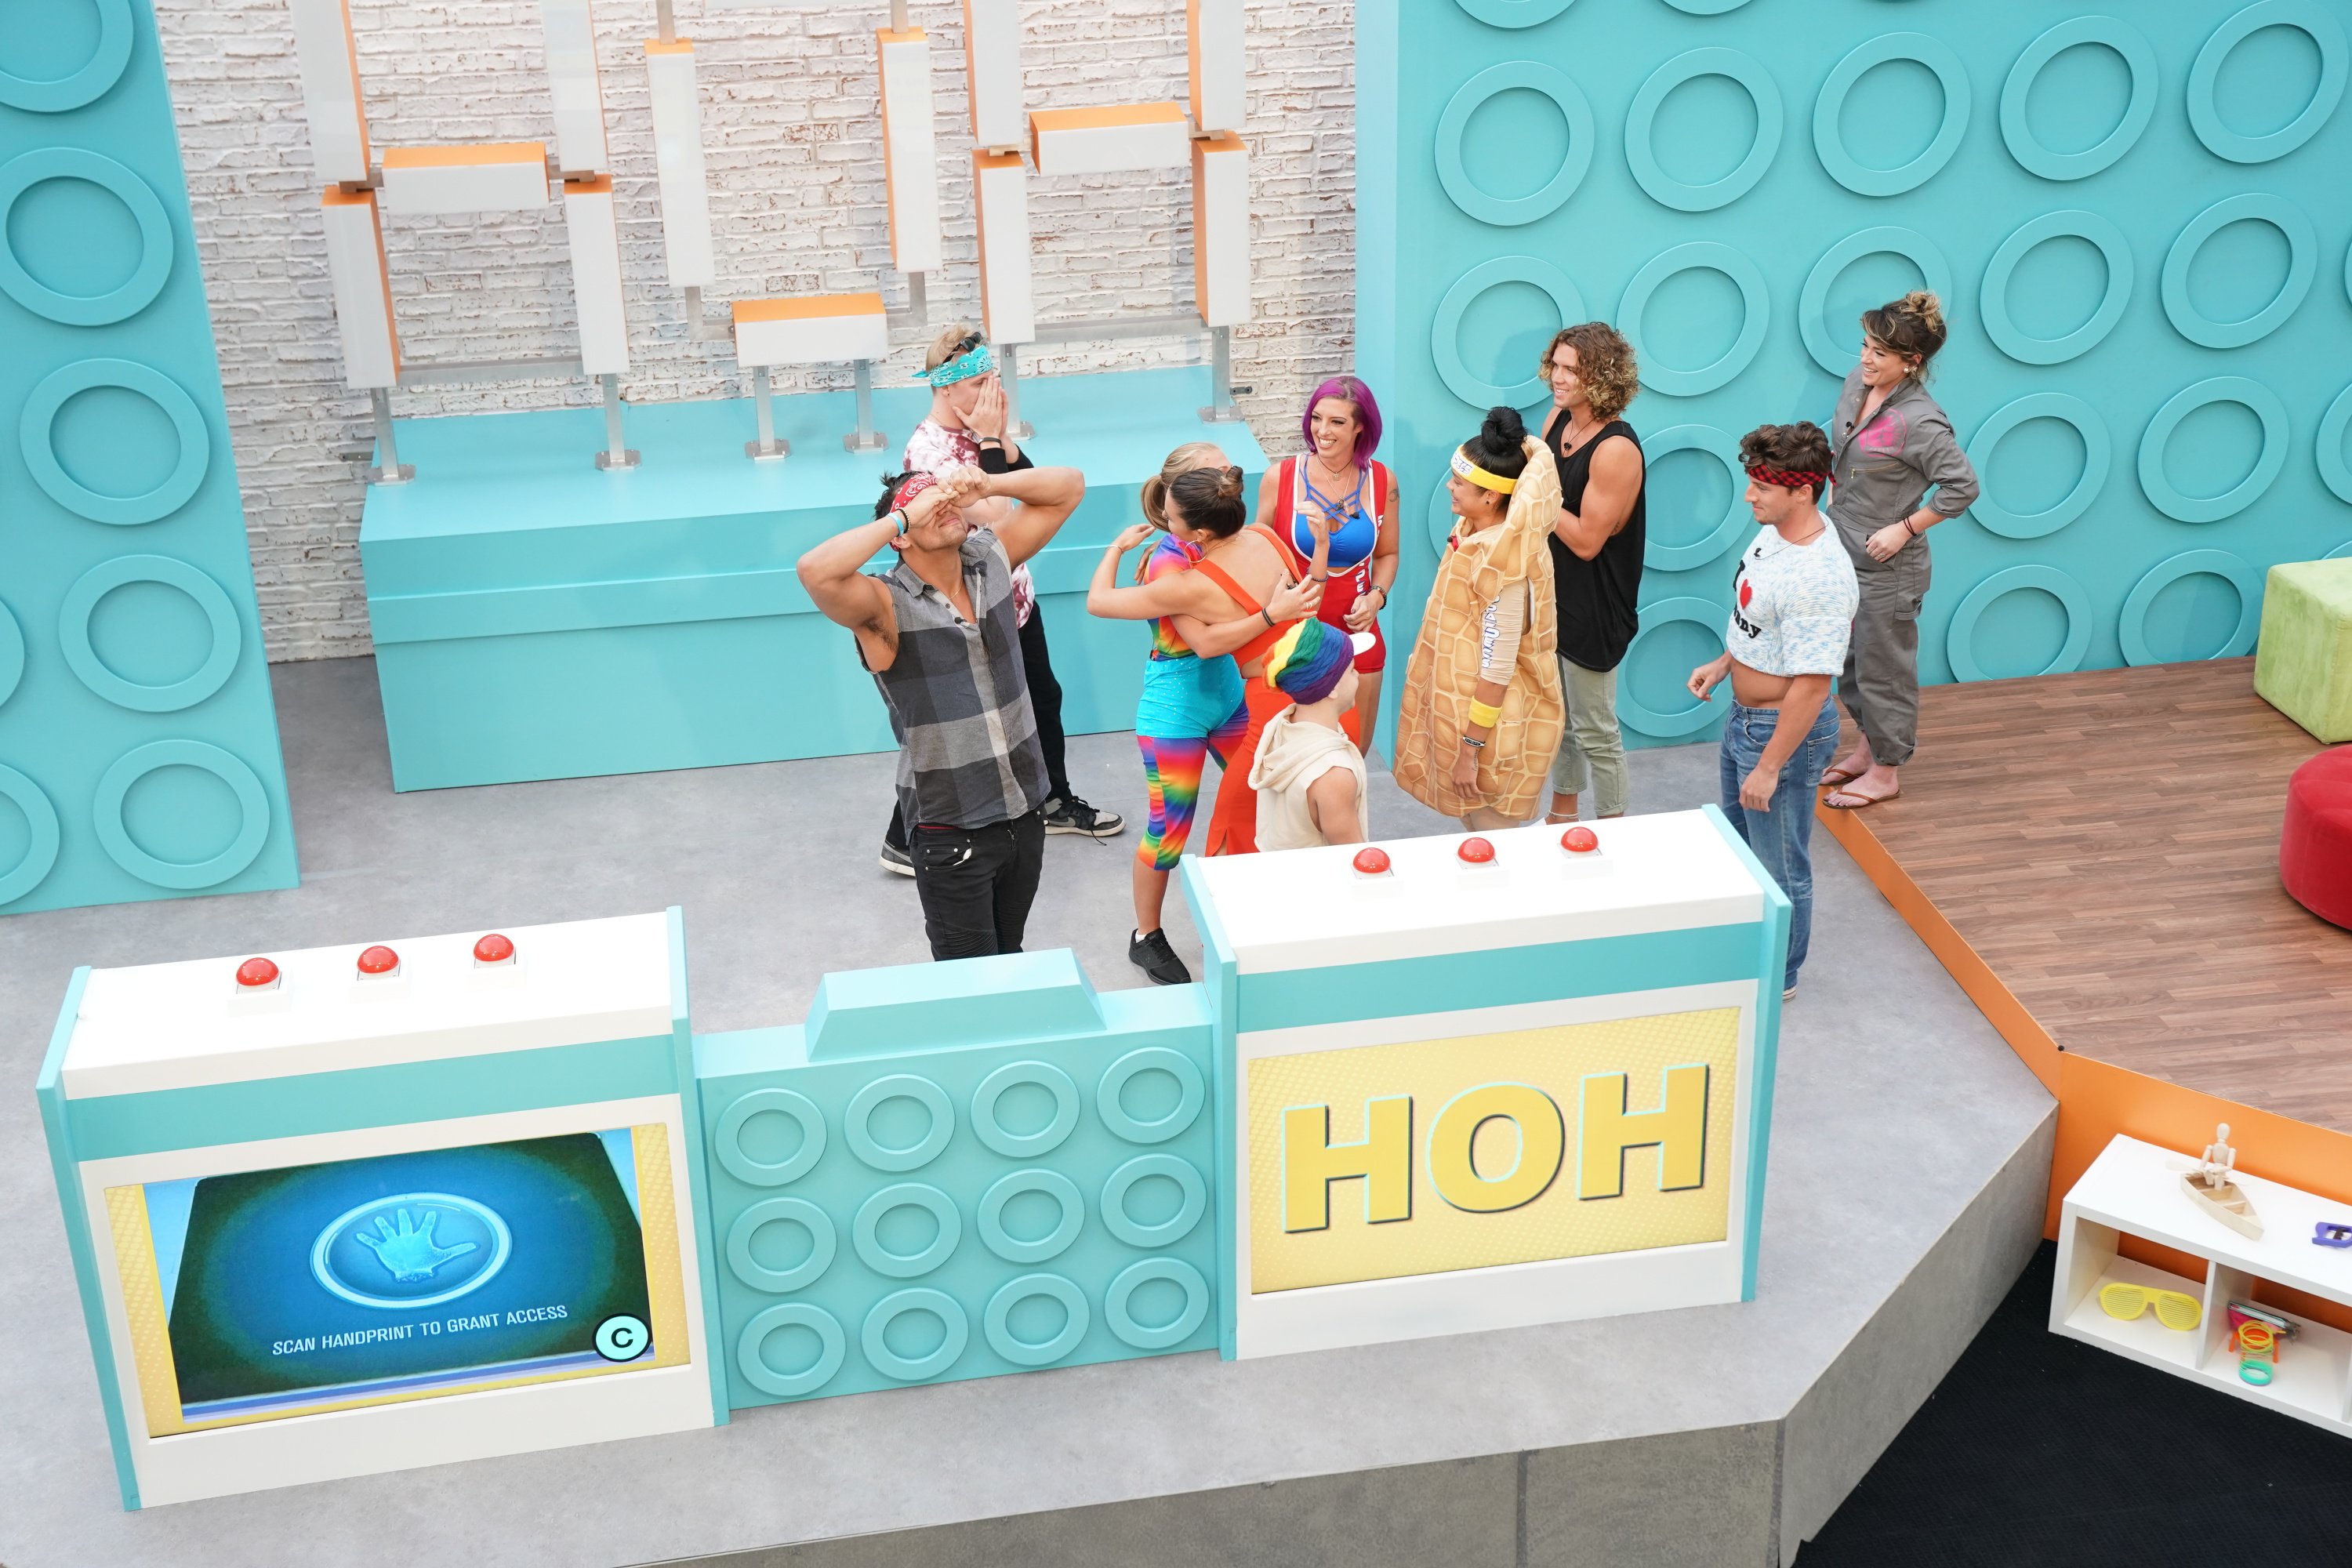 Haleigh Broucher wins the HOH Comp on Big Brother